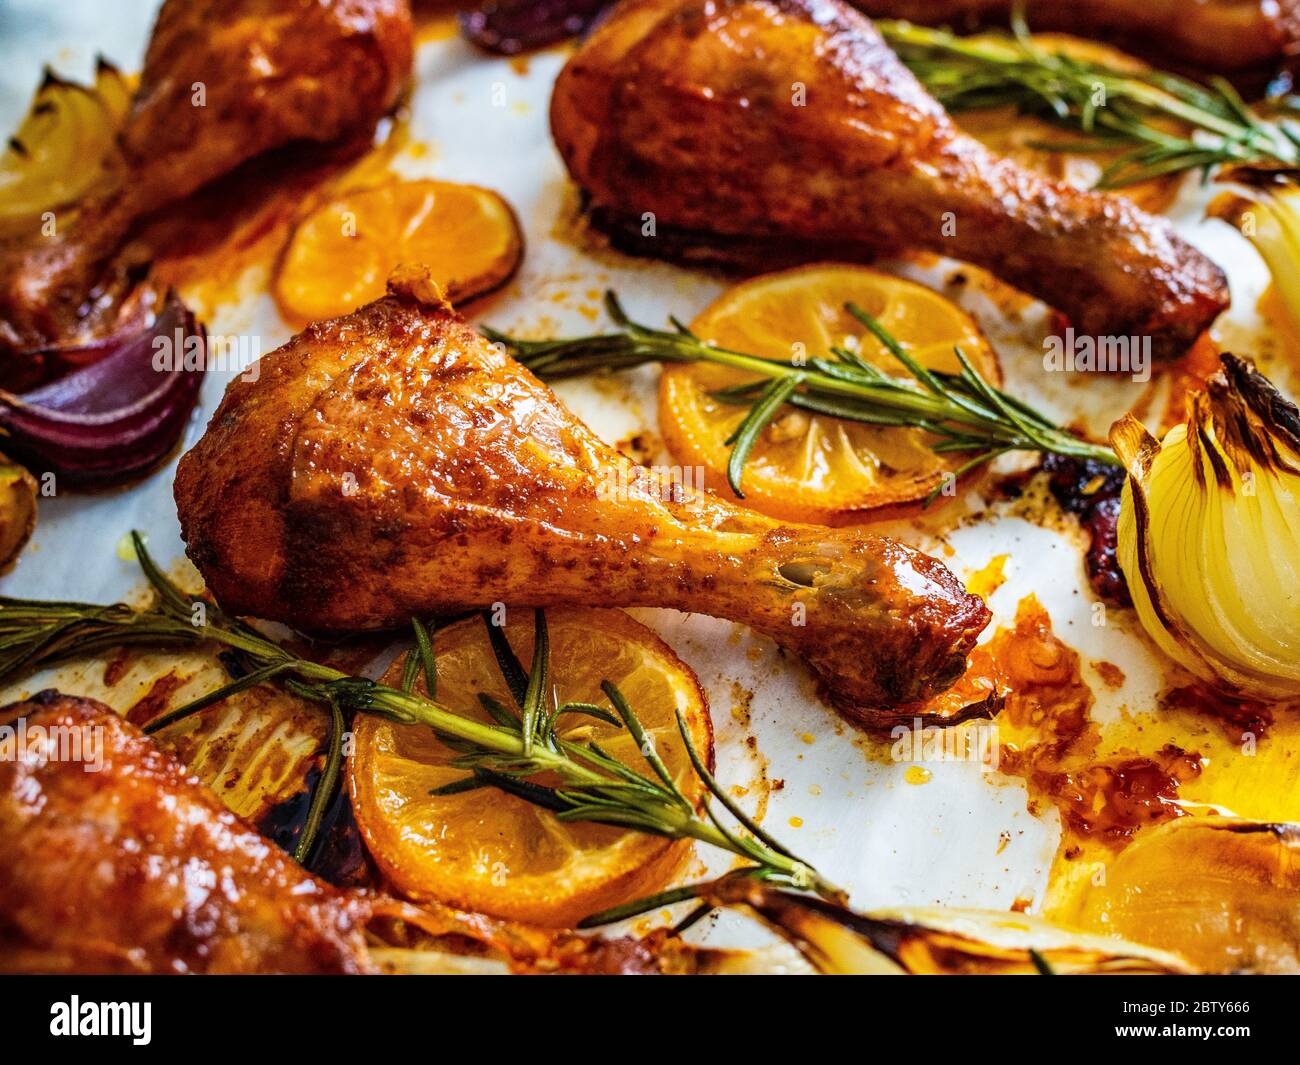 Grilled chicken drumsticks with onion and lemon Stock Photo